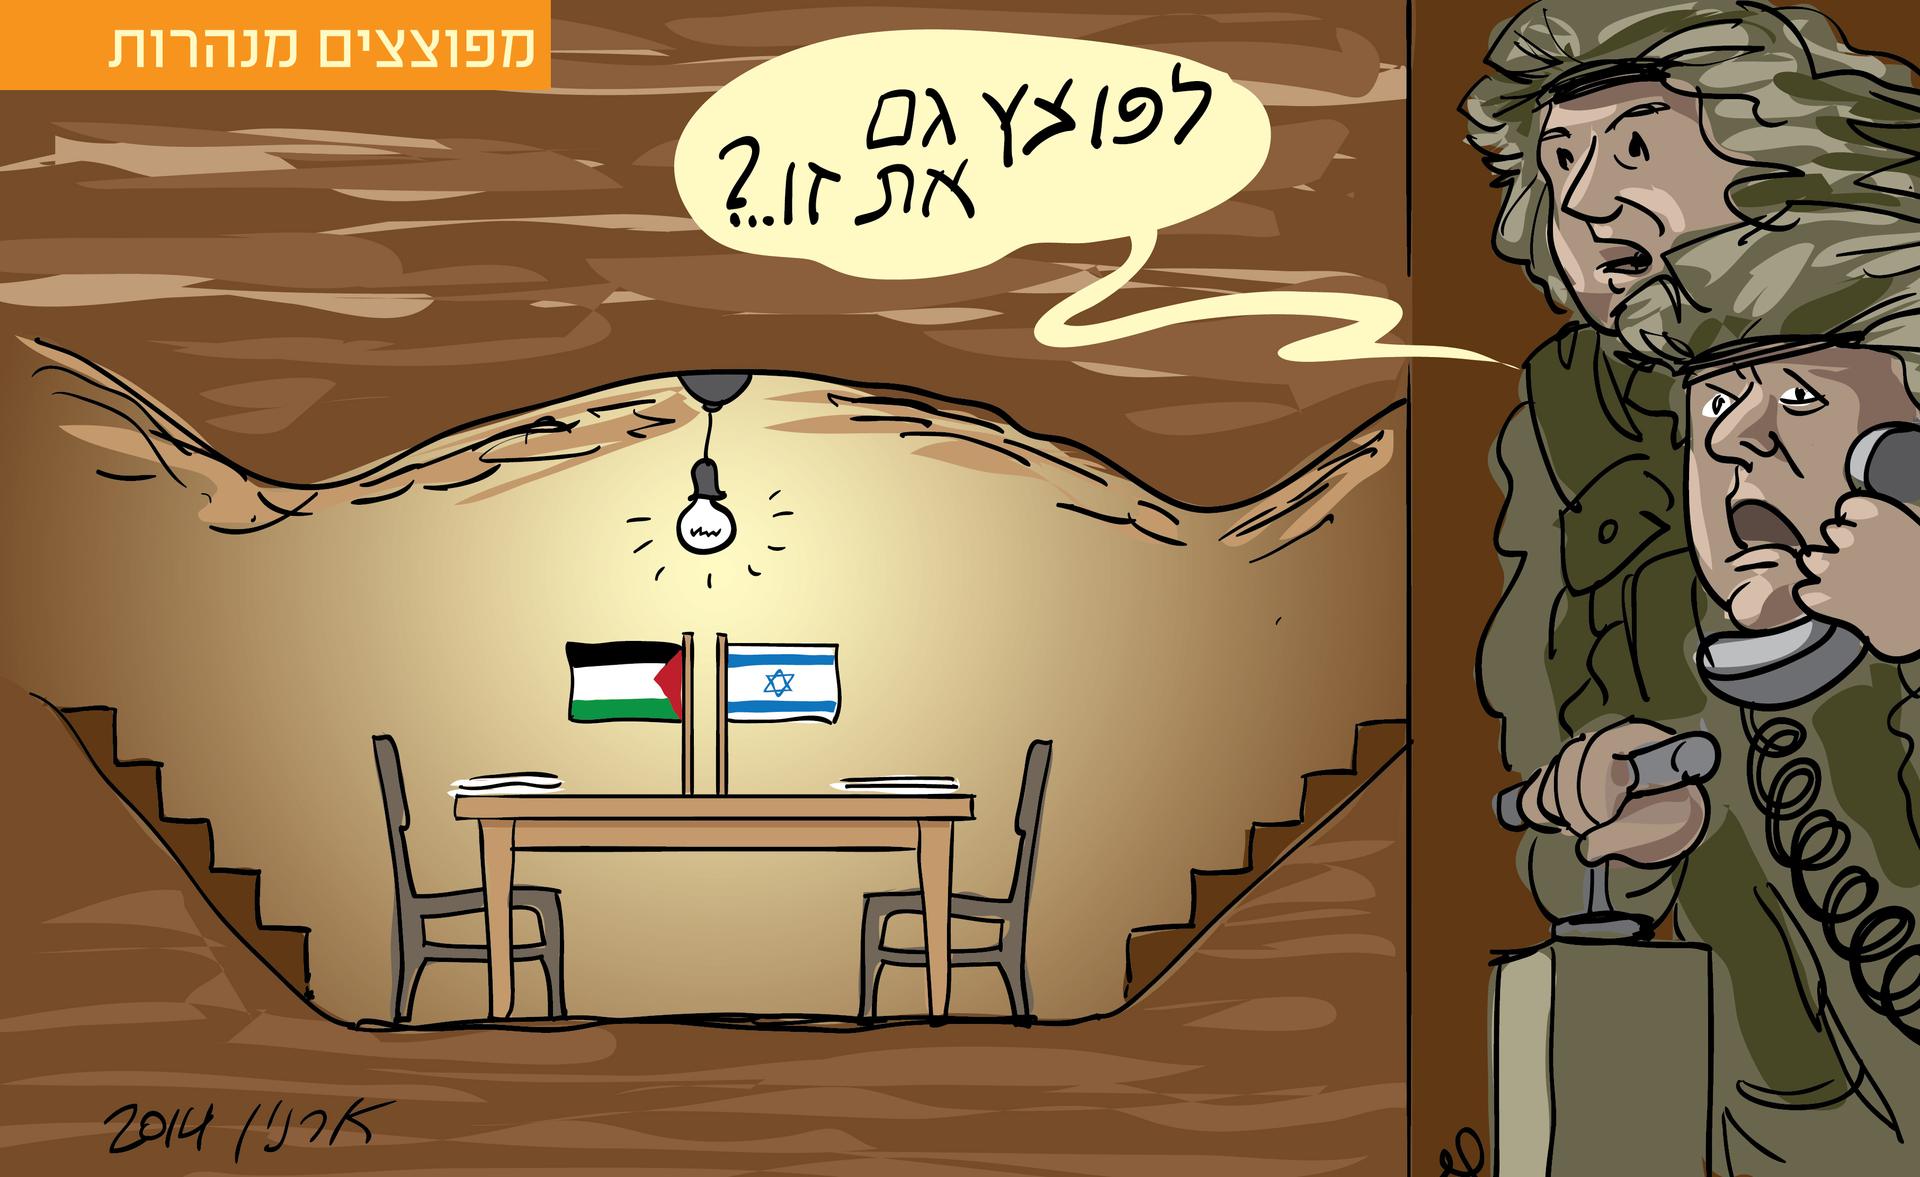 One of the main targets of the Israeli ground offensive into Gaza is the extensive tunnel network which has enabled Hamas militants easy access into Israel. In this cartoon two Israeli soldiers talk to their commander about whether or not to blow up a tun